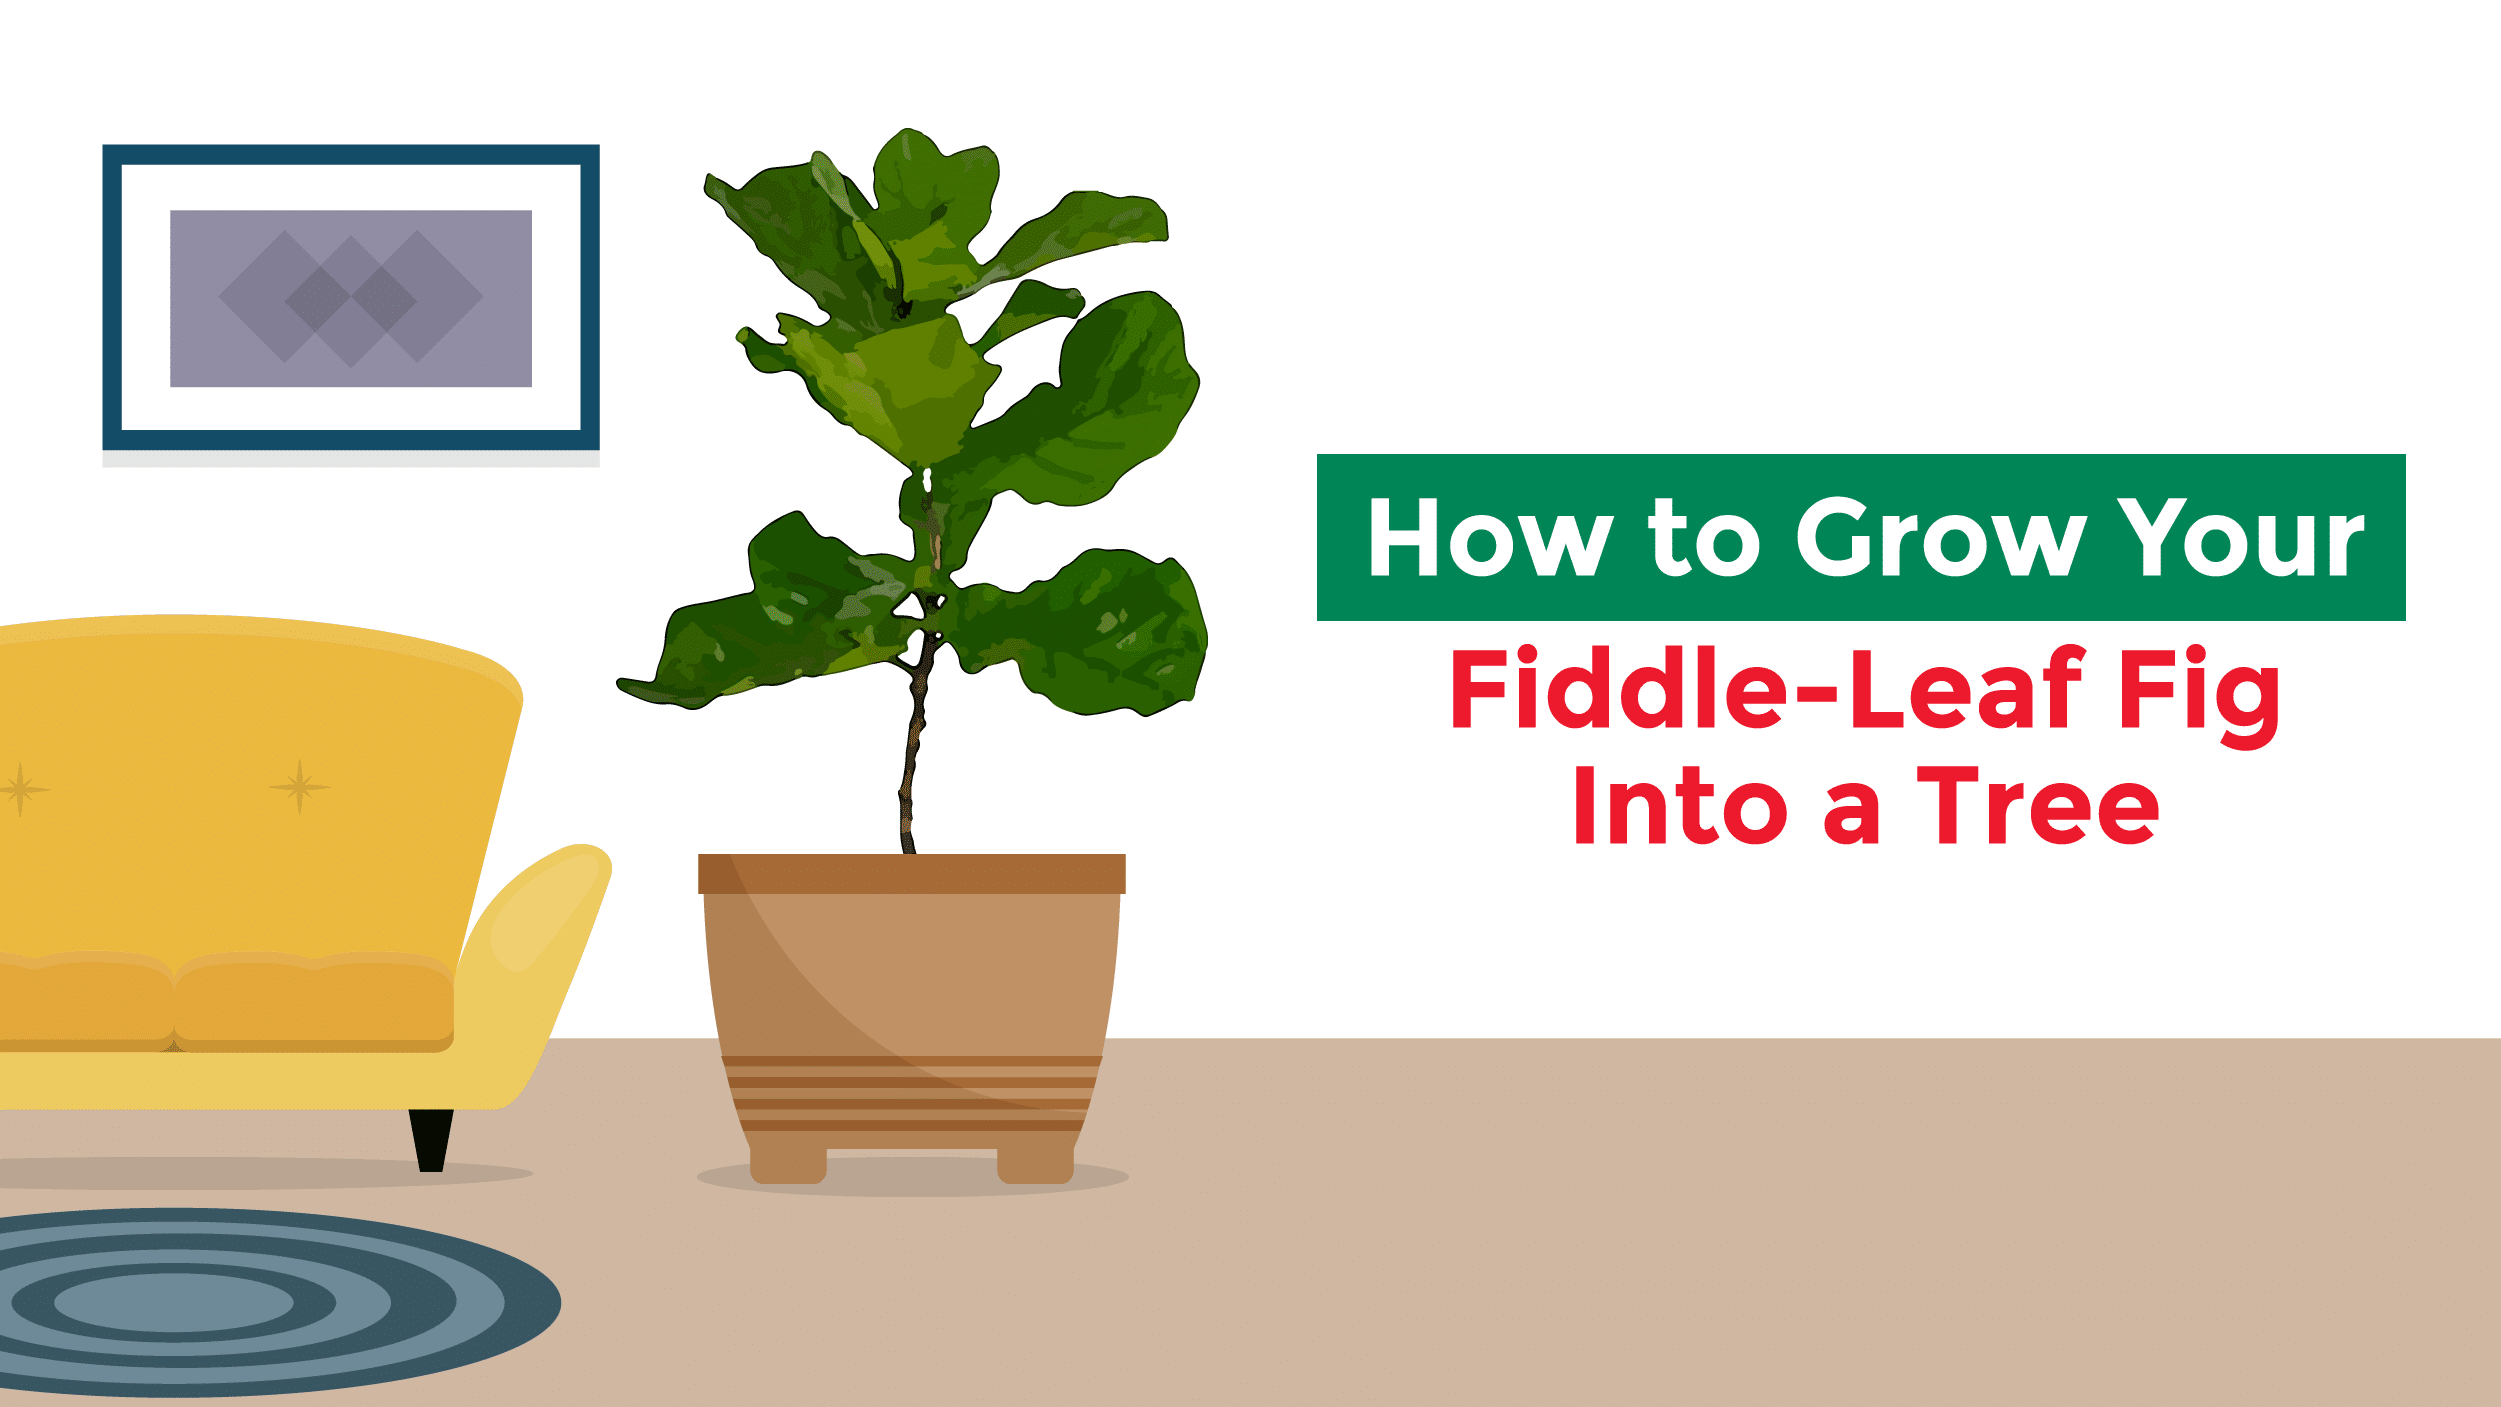 How-To: Grow Your Fiddle-Leaf Fig Into a Tree